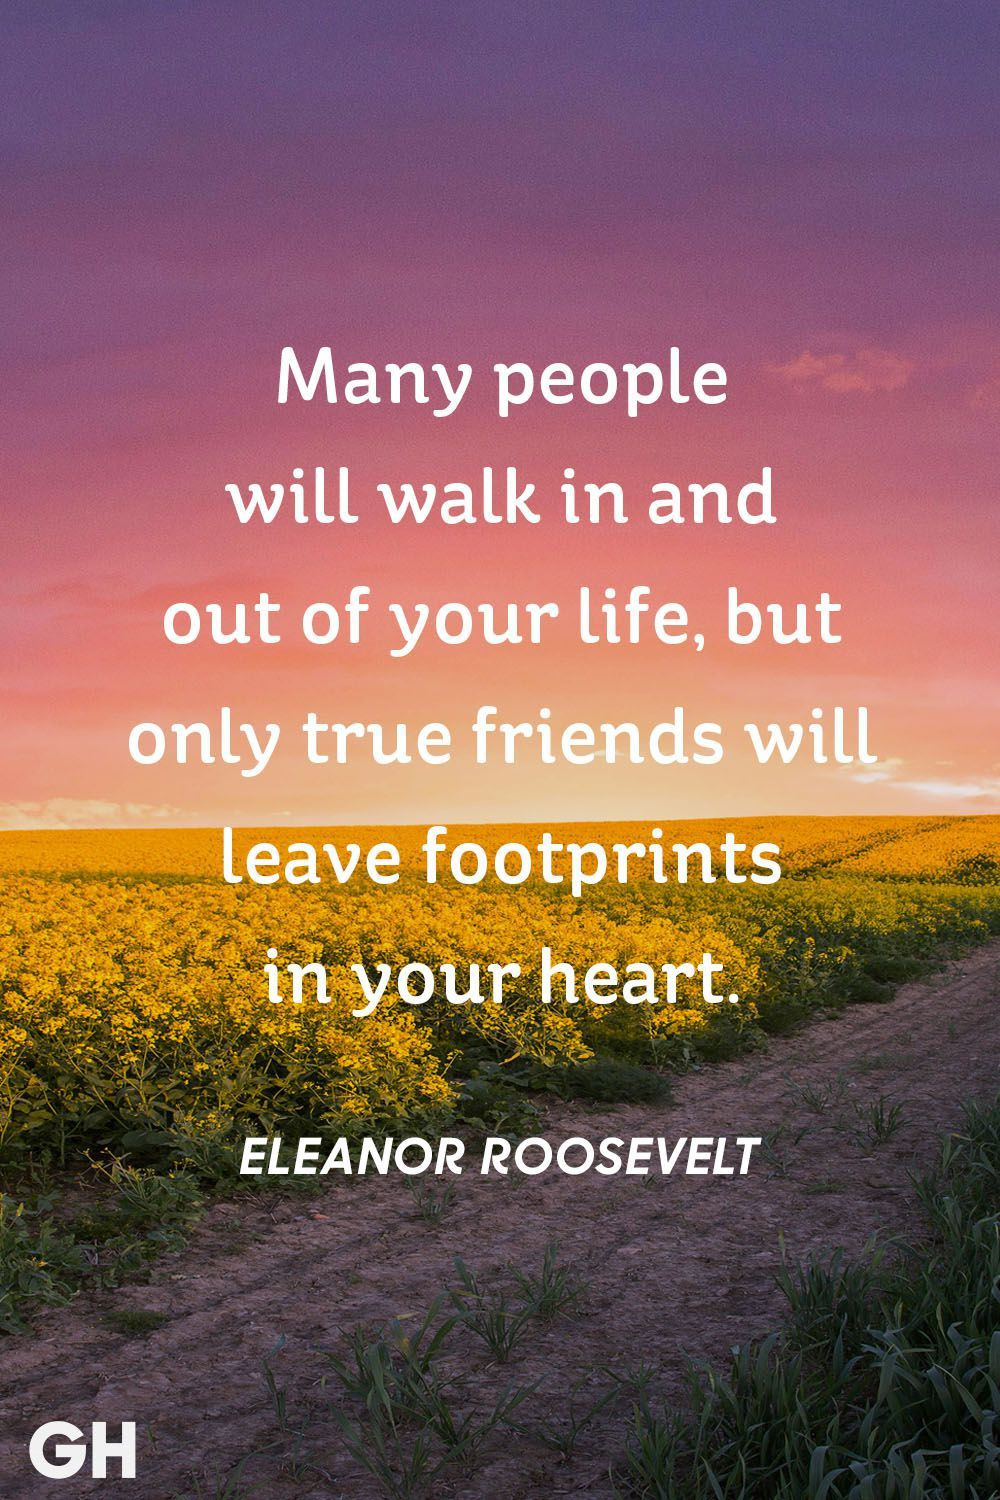 Quote About Life And Friends
 40 Friendship Quotes to With Your Besties